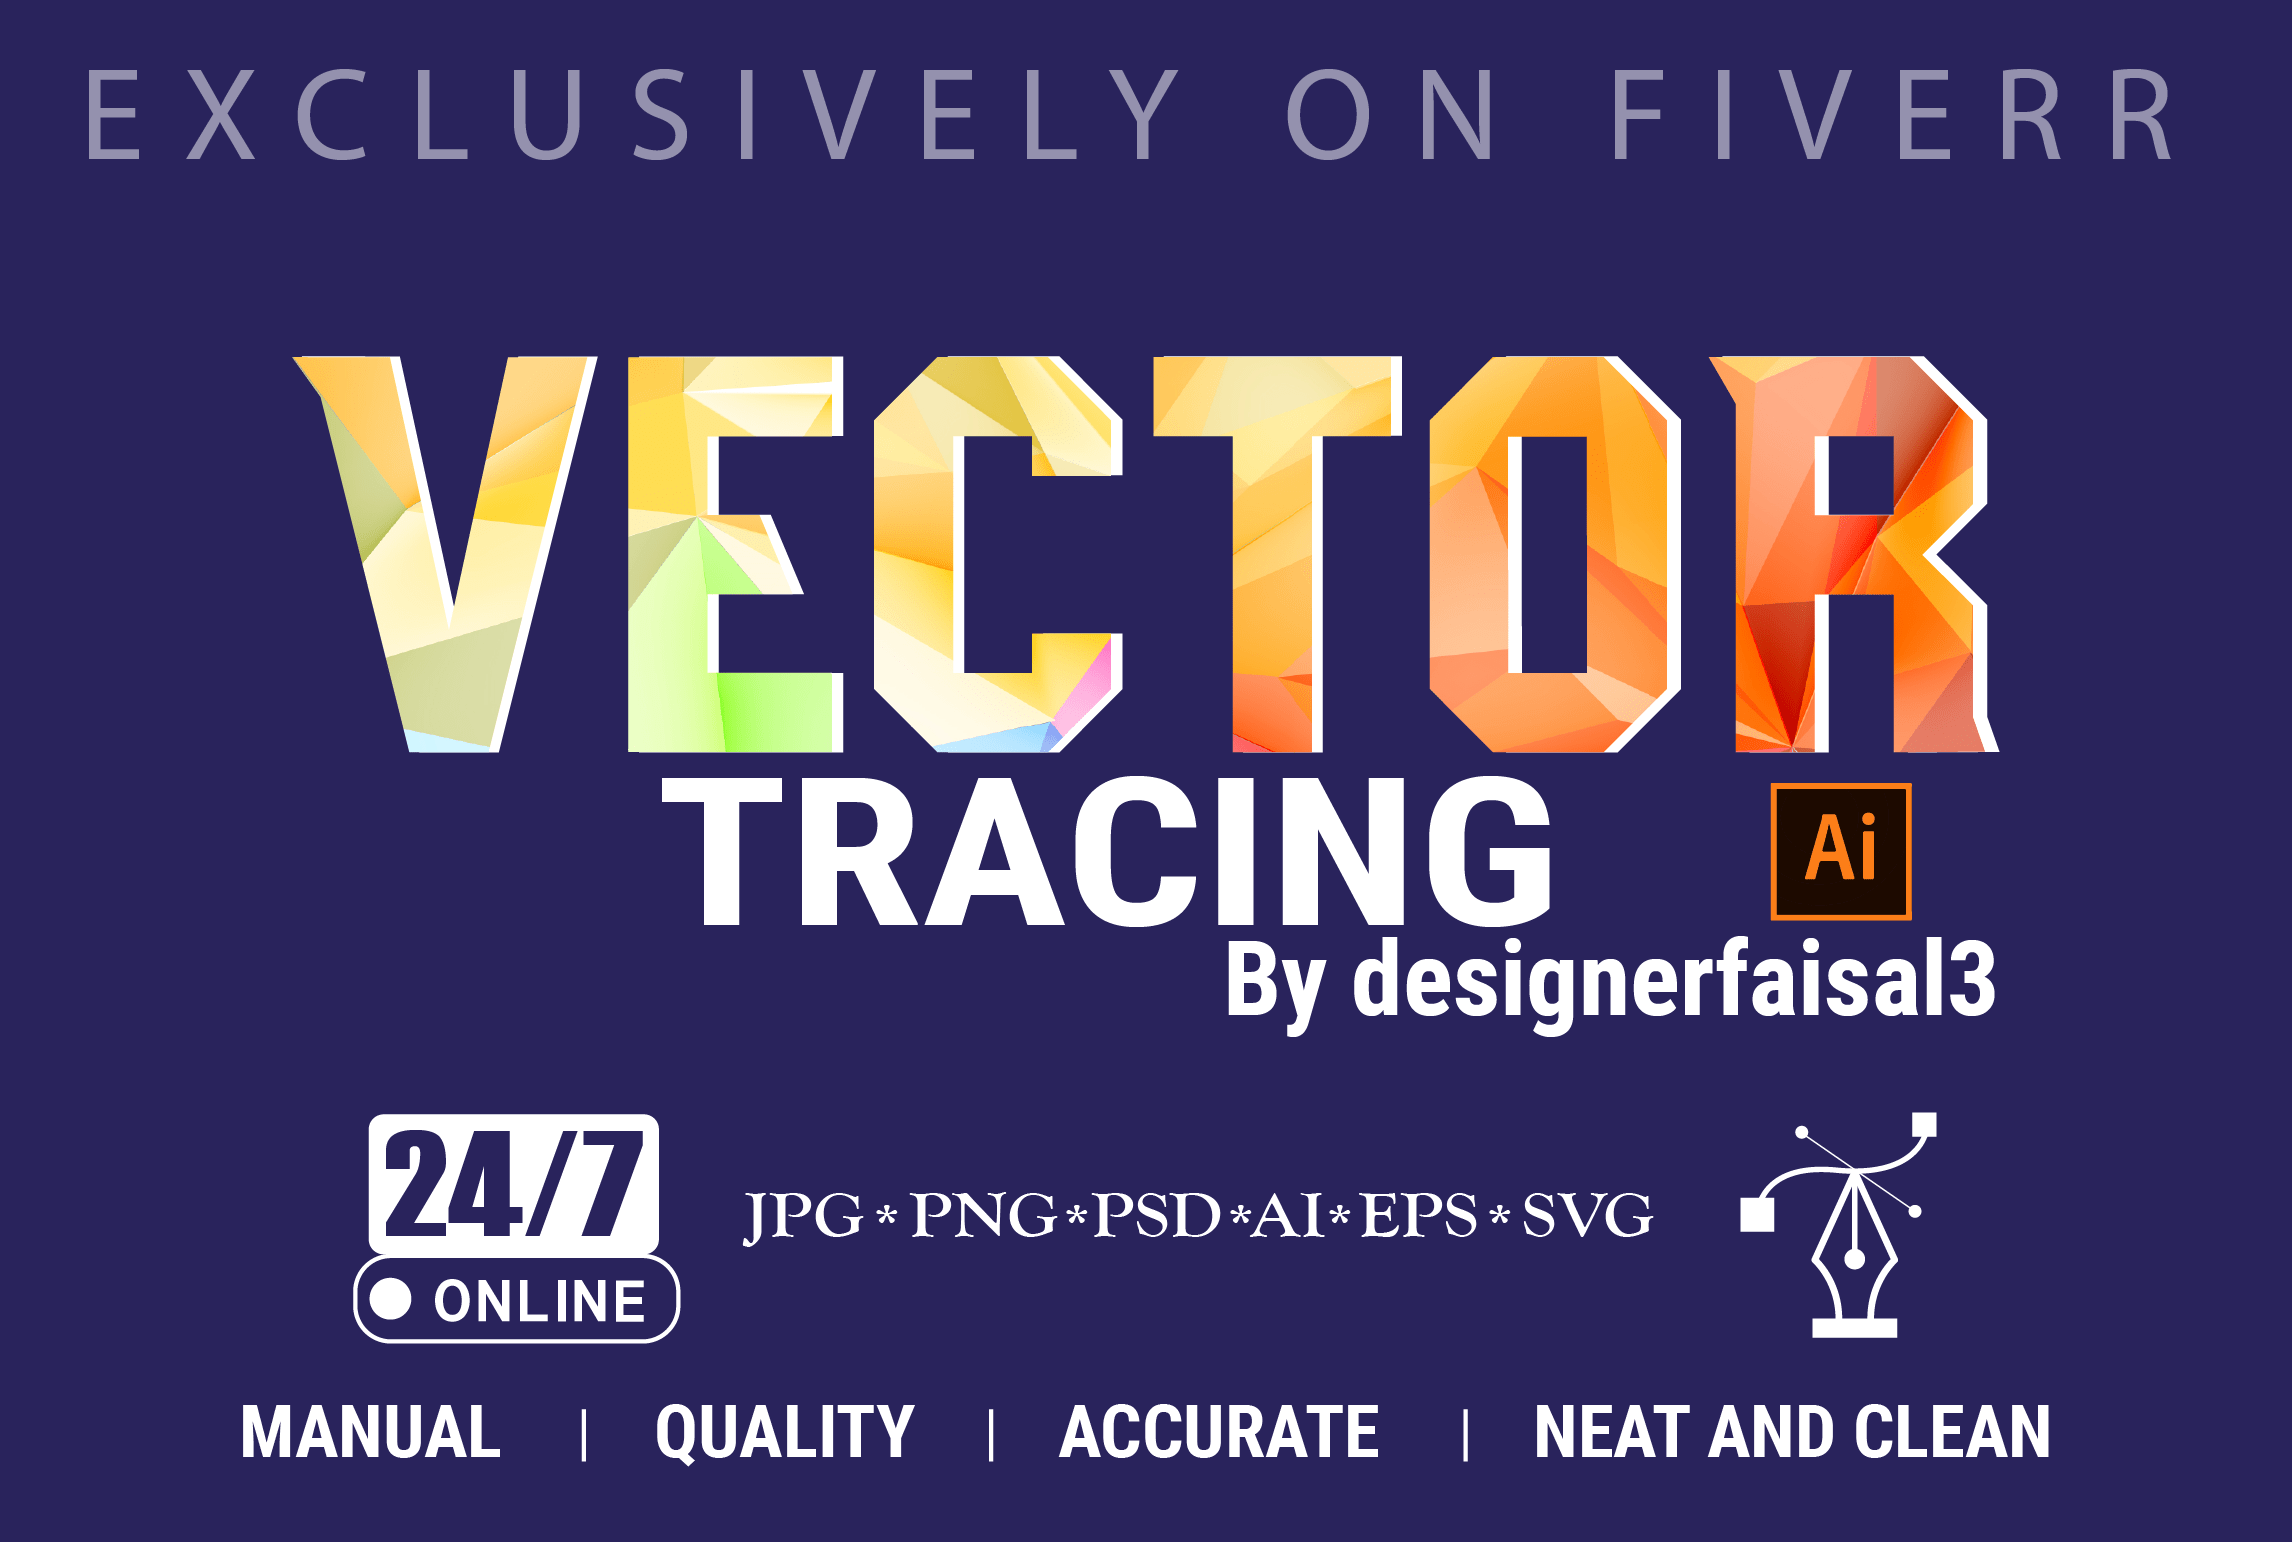 I will vectorize logo, vector tracing, convert to vector, clean up within 1 hour, FiverrBox